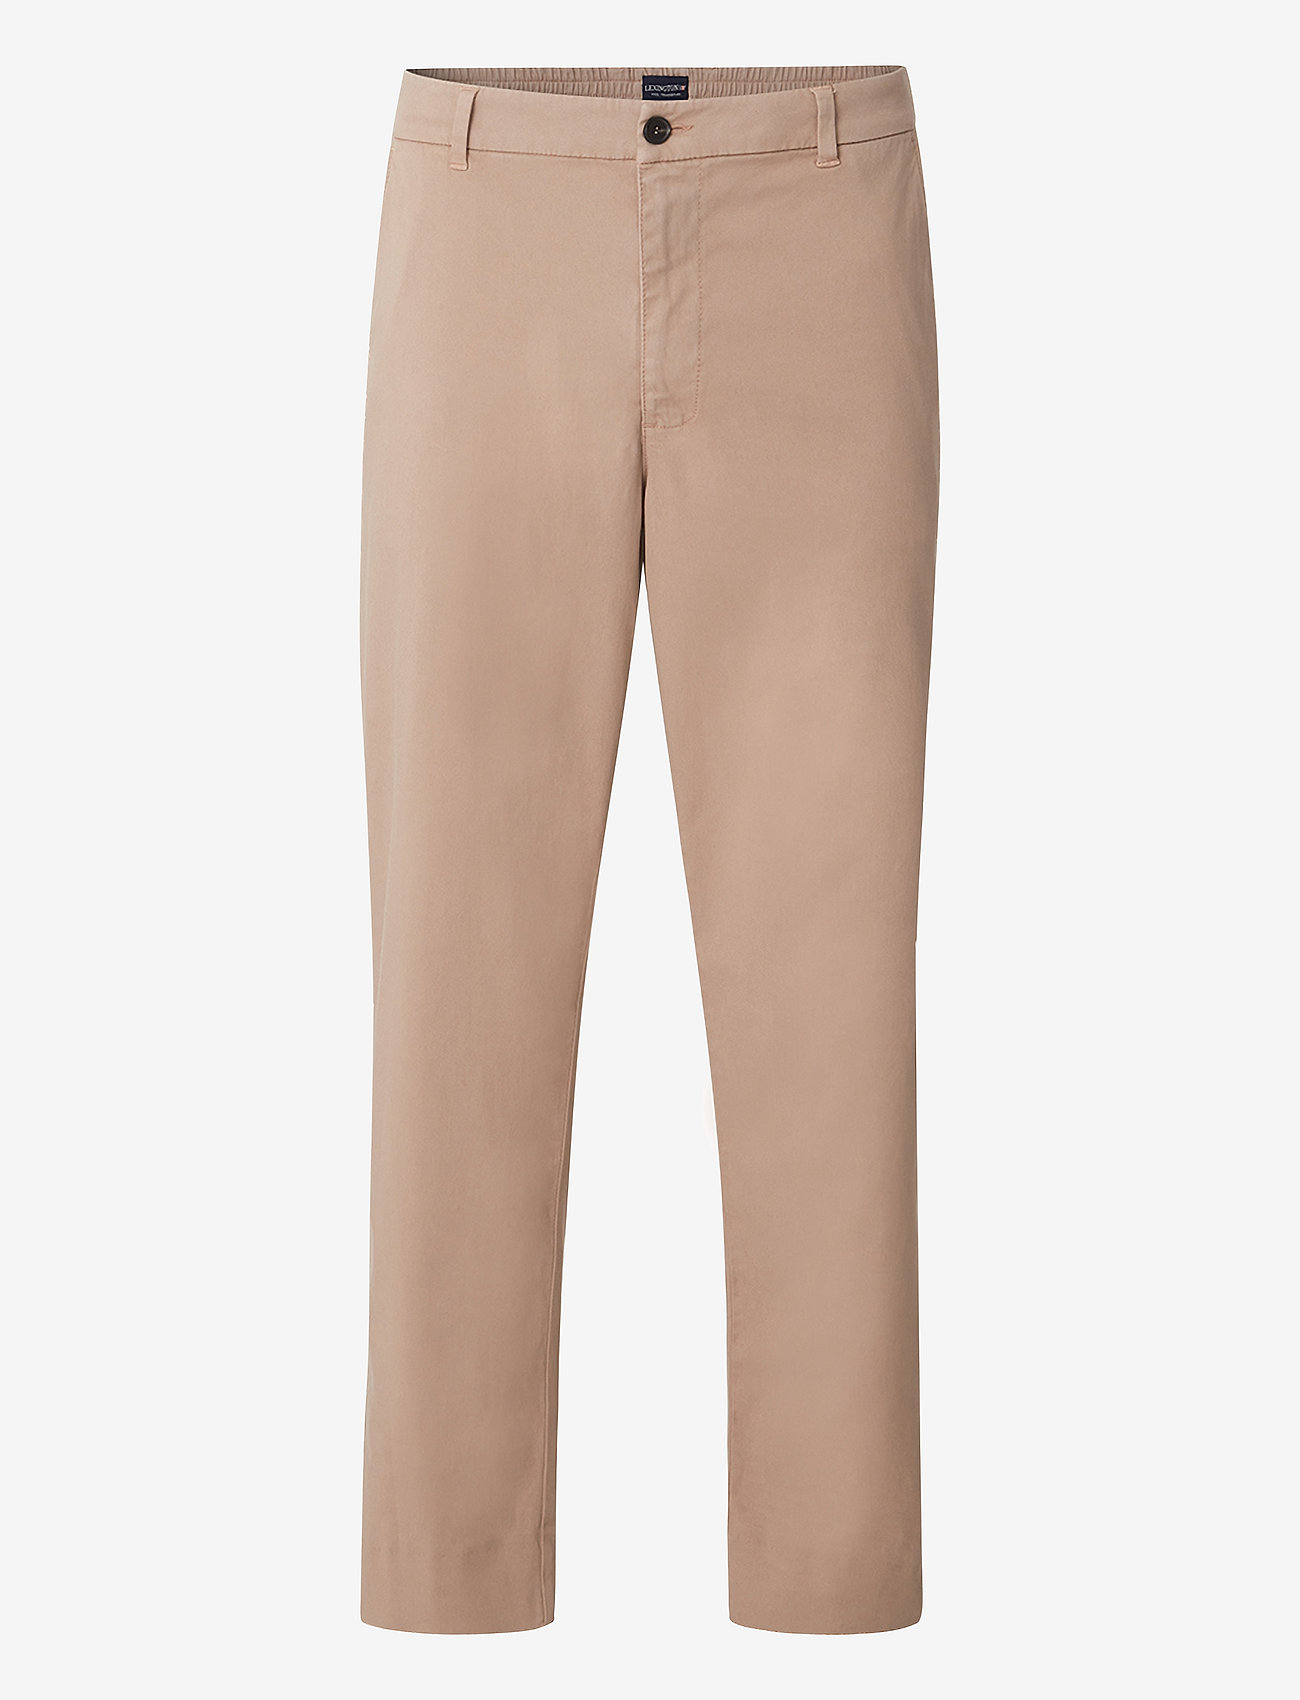 Lexington Clothing - Classic Elasticated  Lyocell Pant - casual - beige/brown - 0